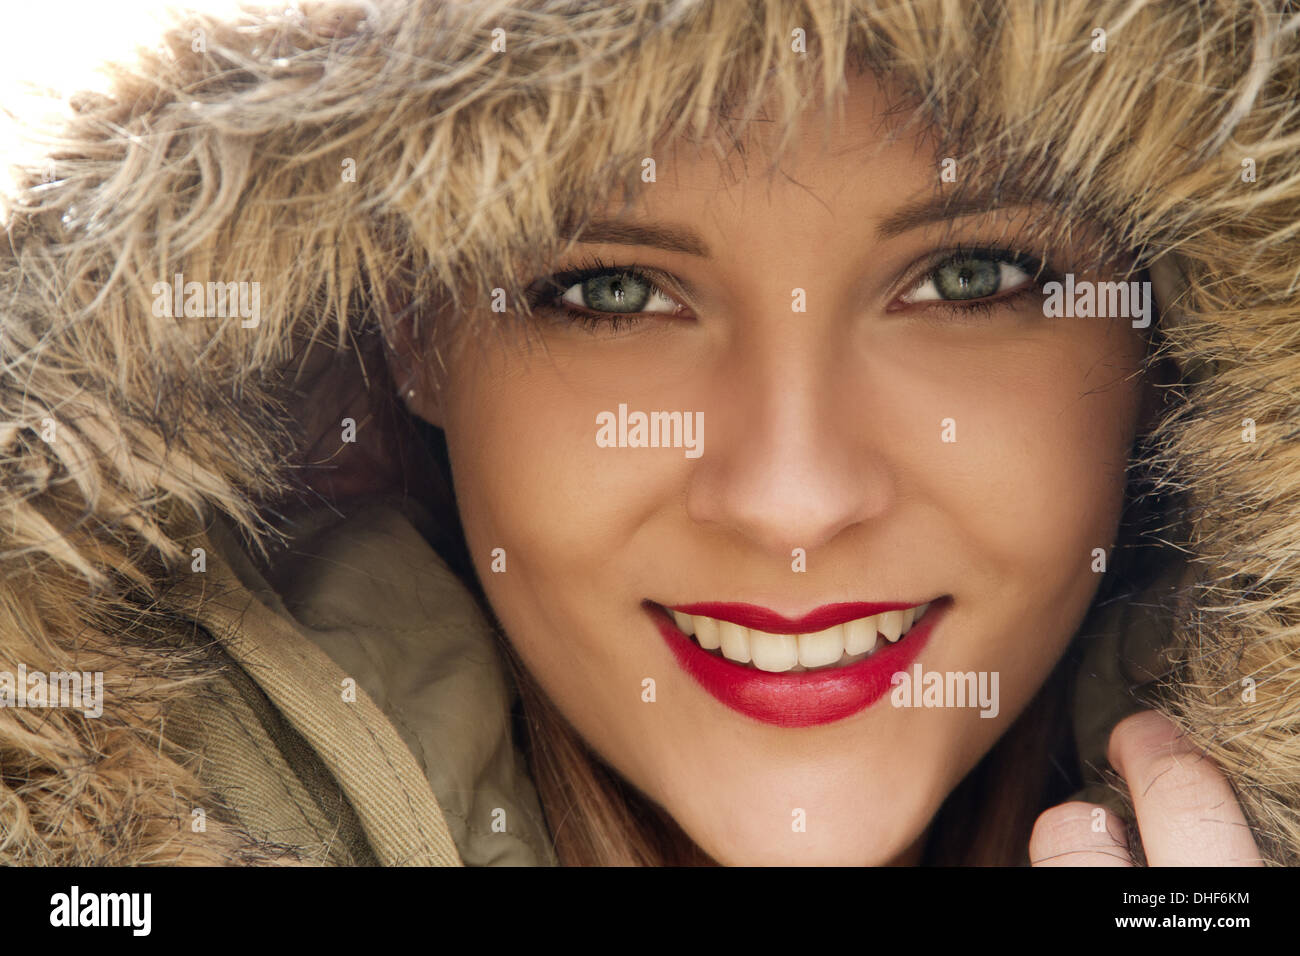 Close up portrait of young woman in parka hood Stock Photo